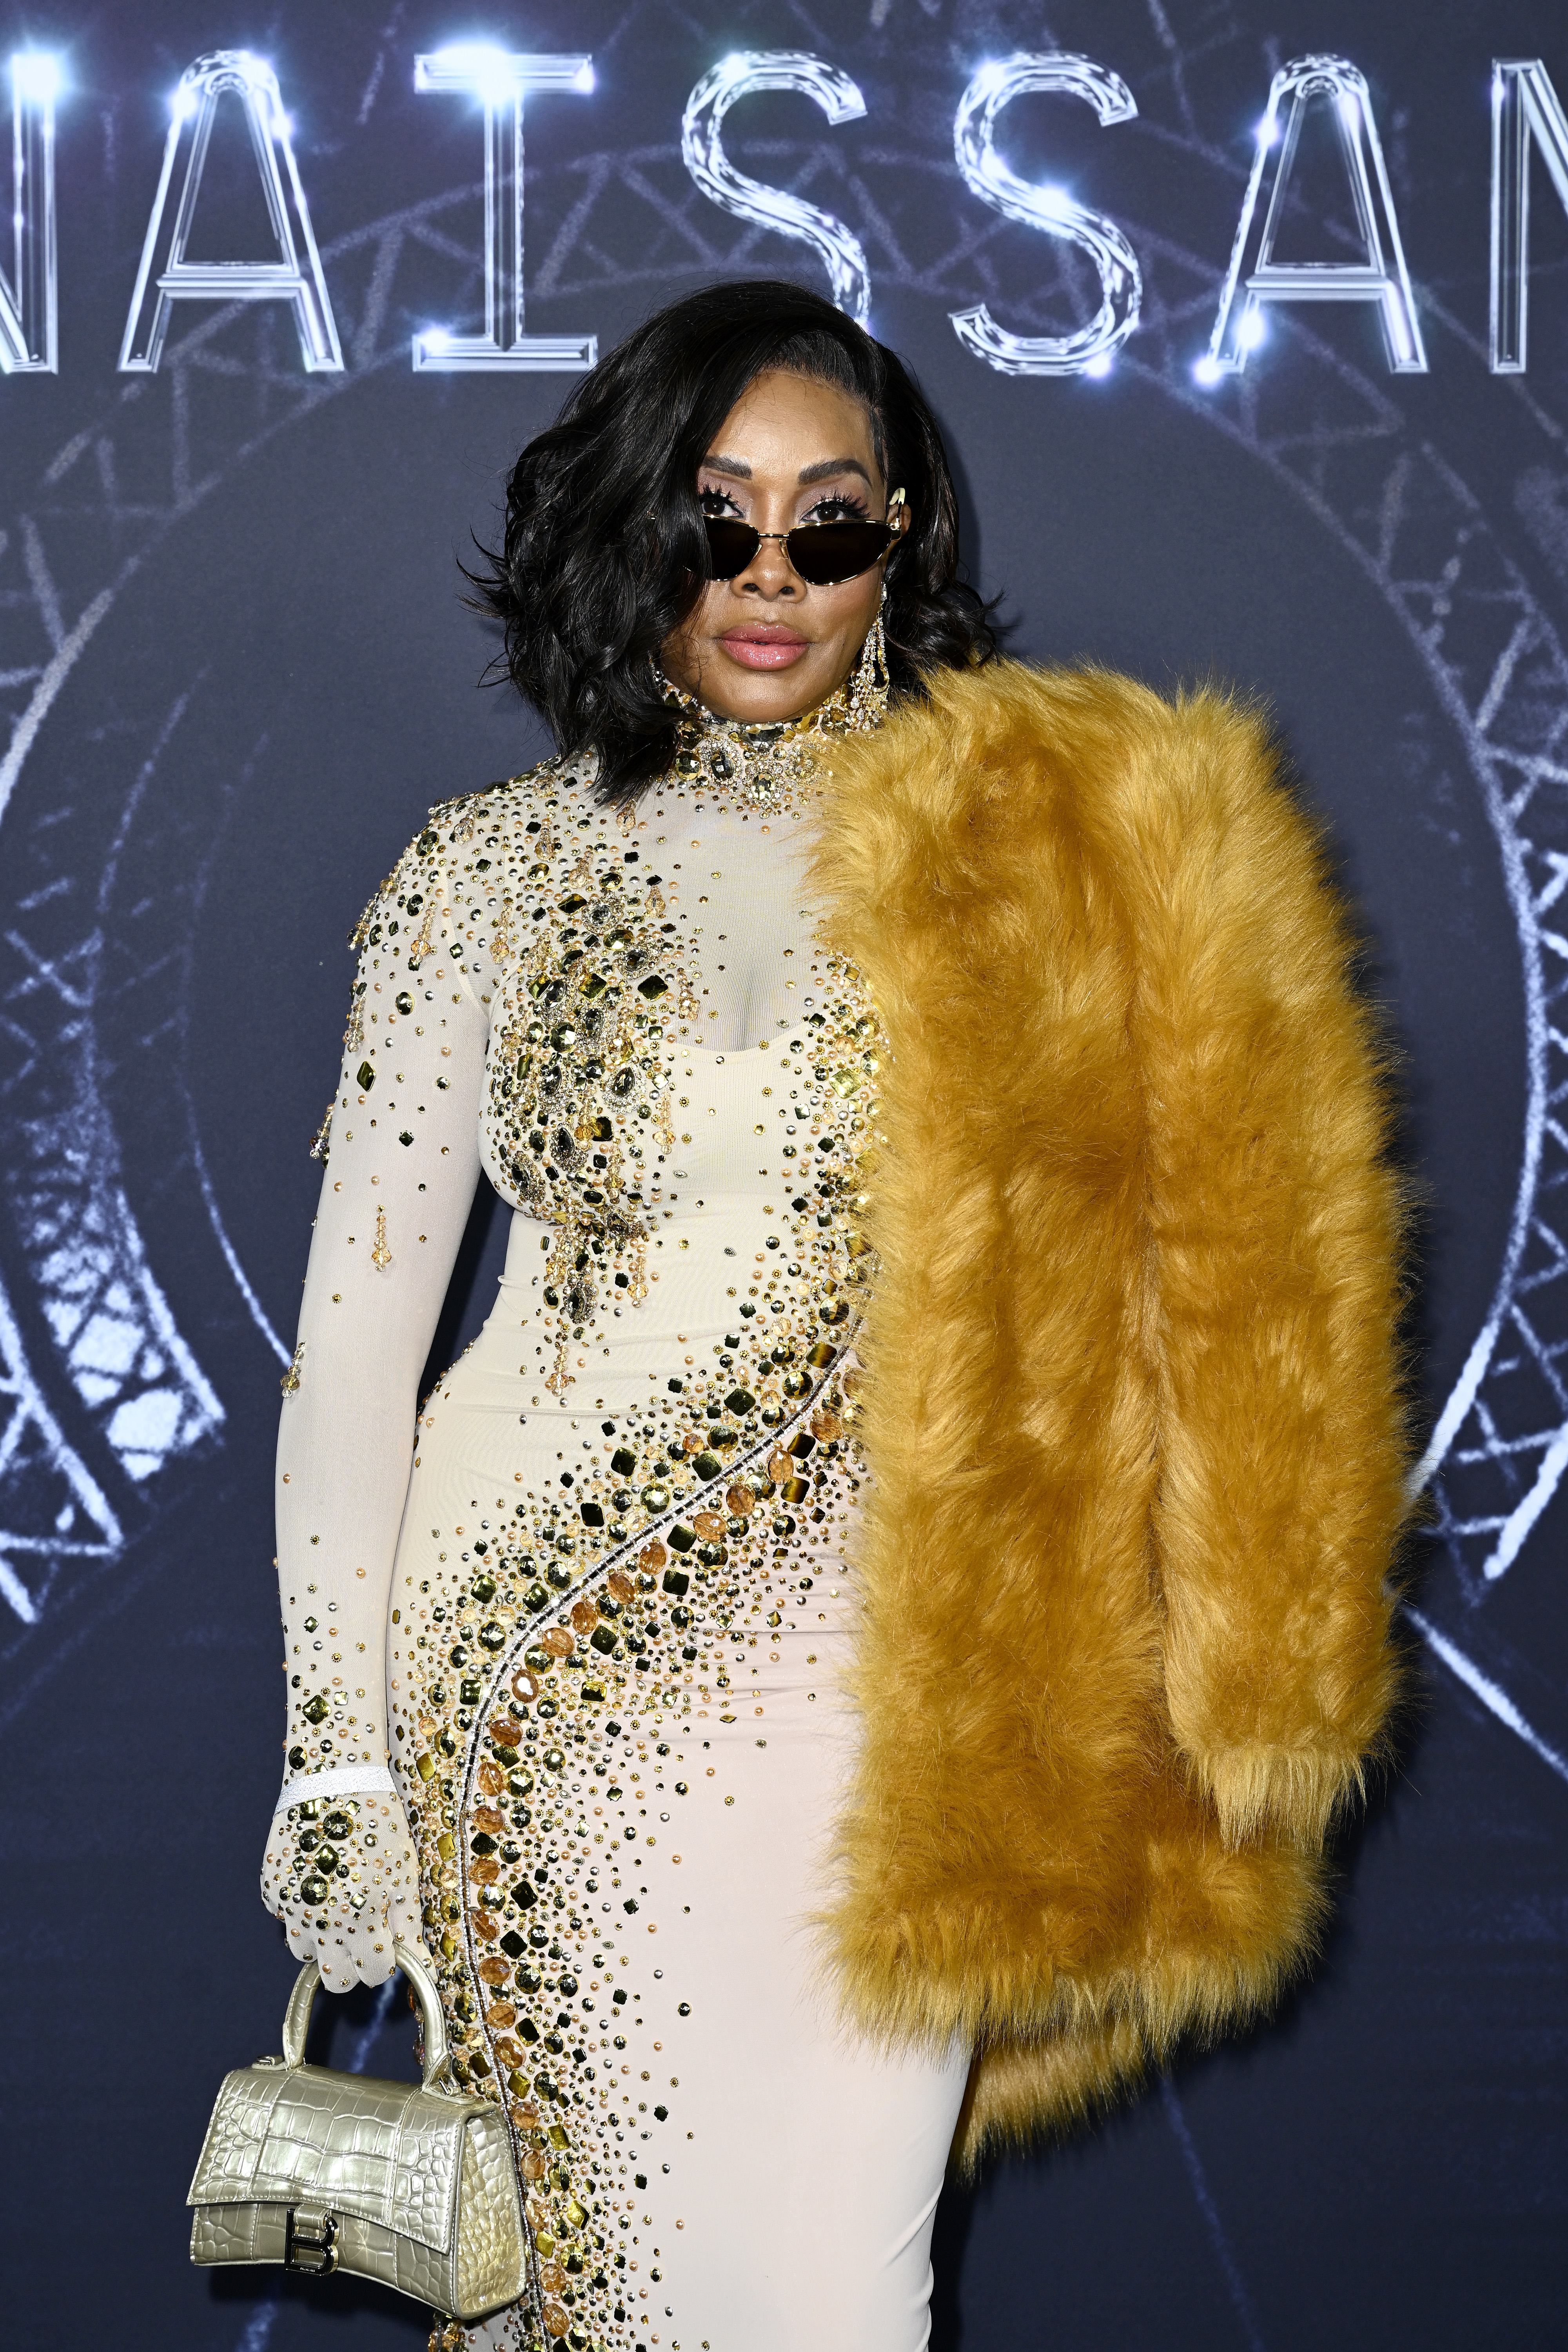 Vivica in a long-sleeved, jewel-swirl dress and furry jacket